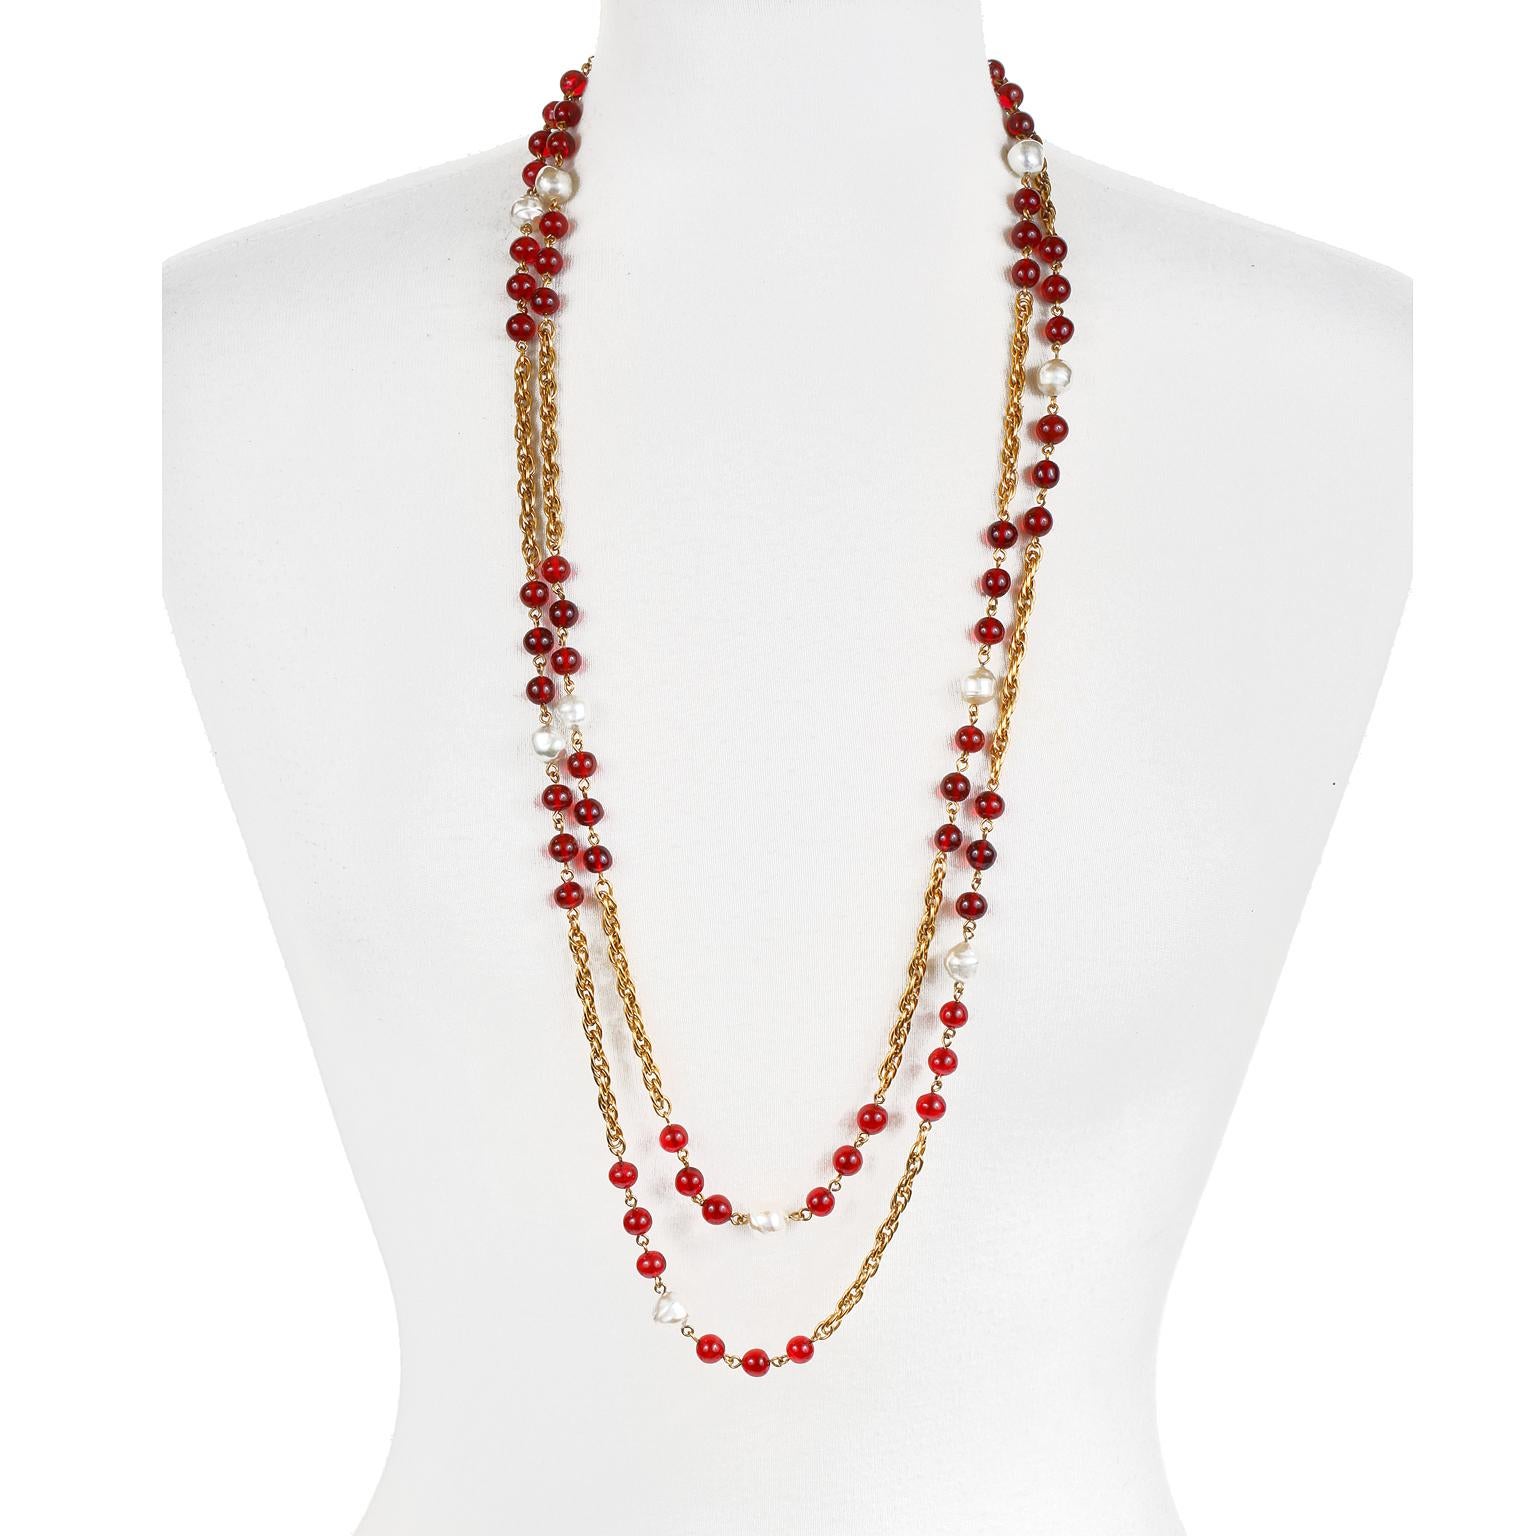 This authentic Chanel Red Gripoix and Pearl Long Necklace is in excellent vintage condition from the 1984 collection.  Red Gripoix glass beads are stationed along an extra long gold tone chain with a single Baroque faux pearl between each cluster. 